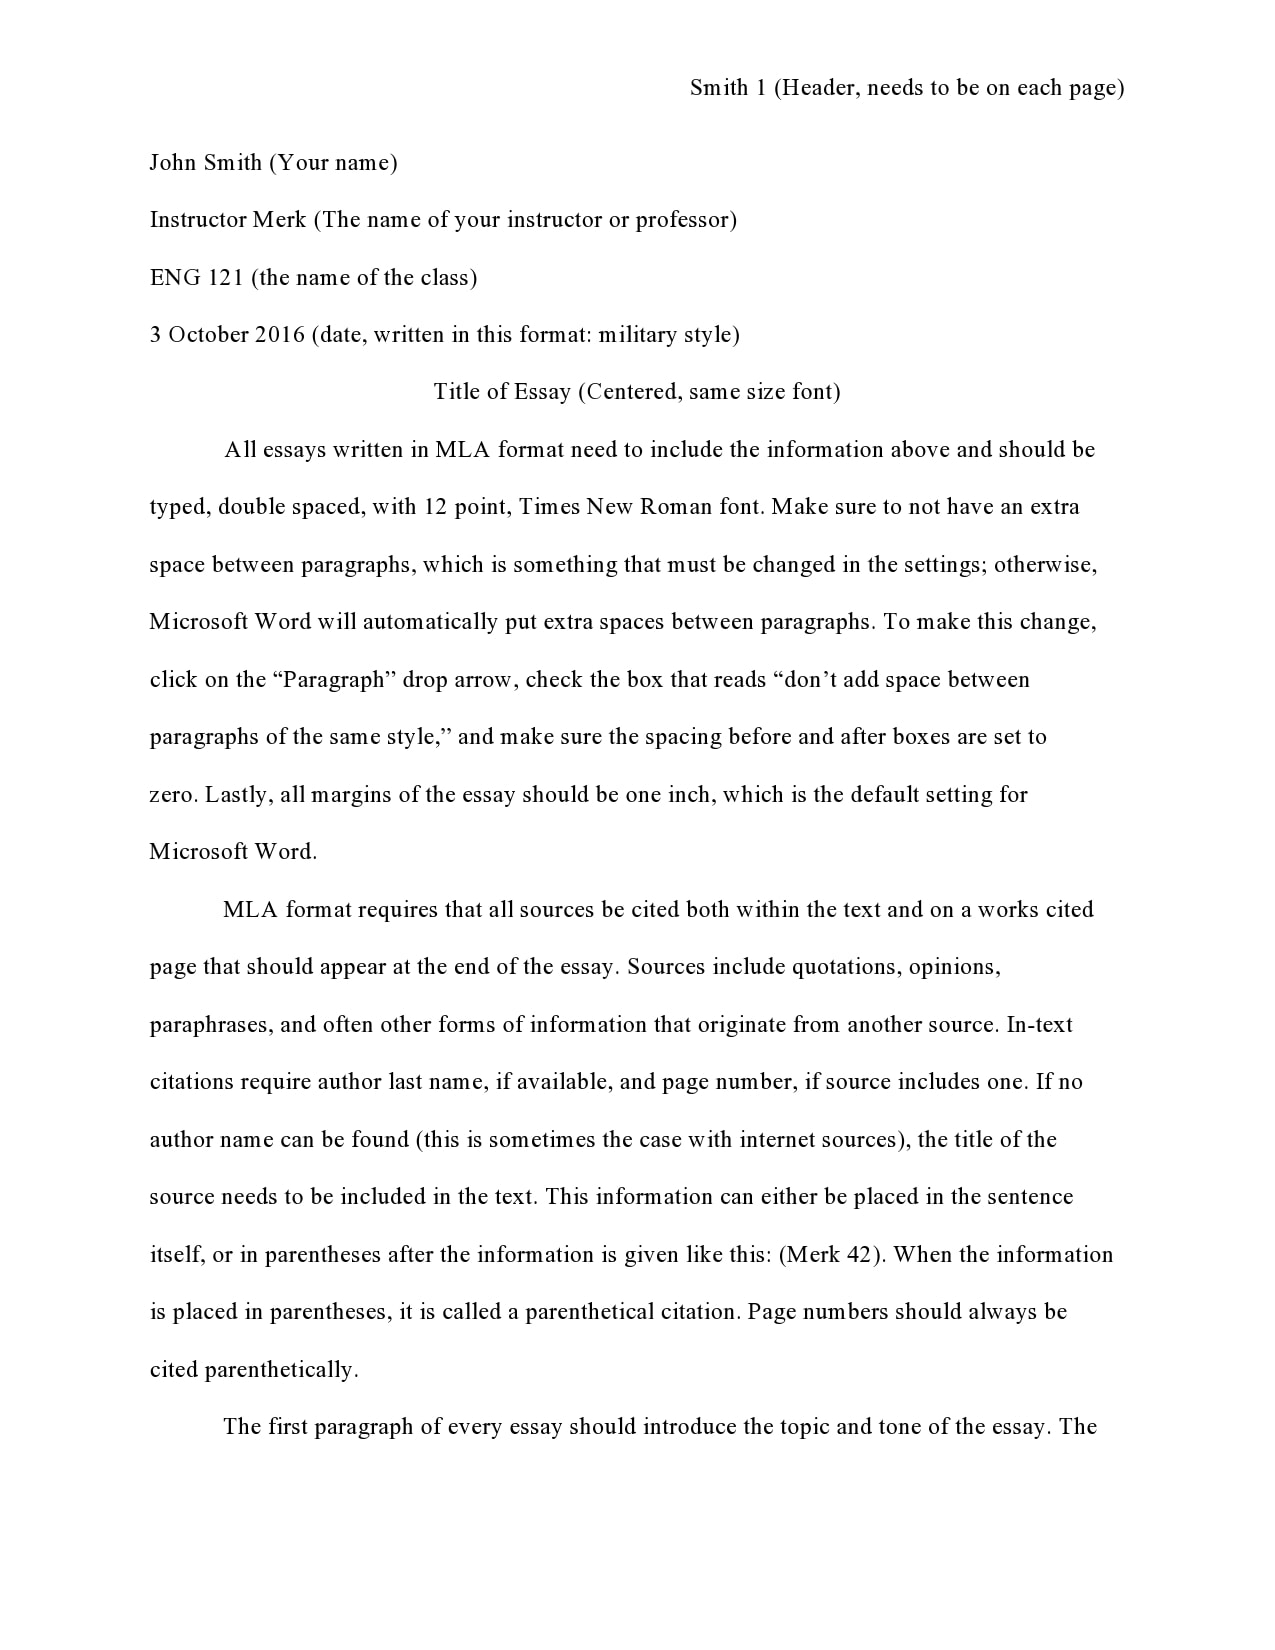 essay title page template